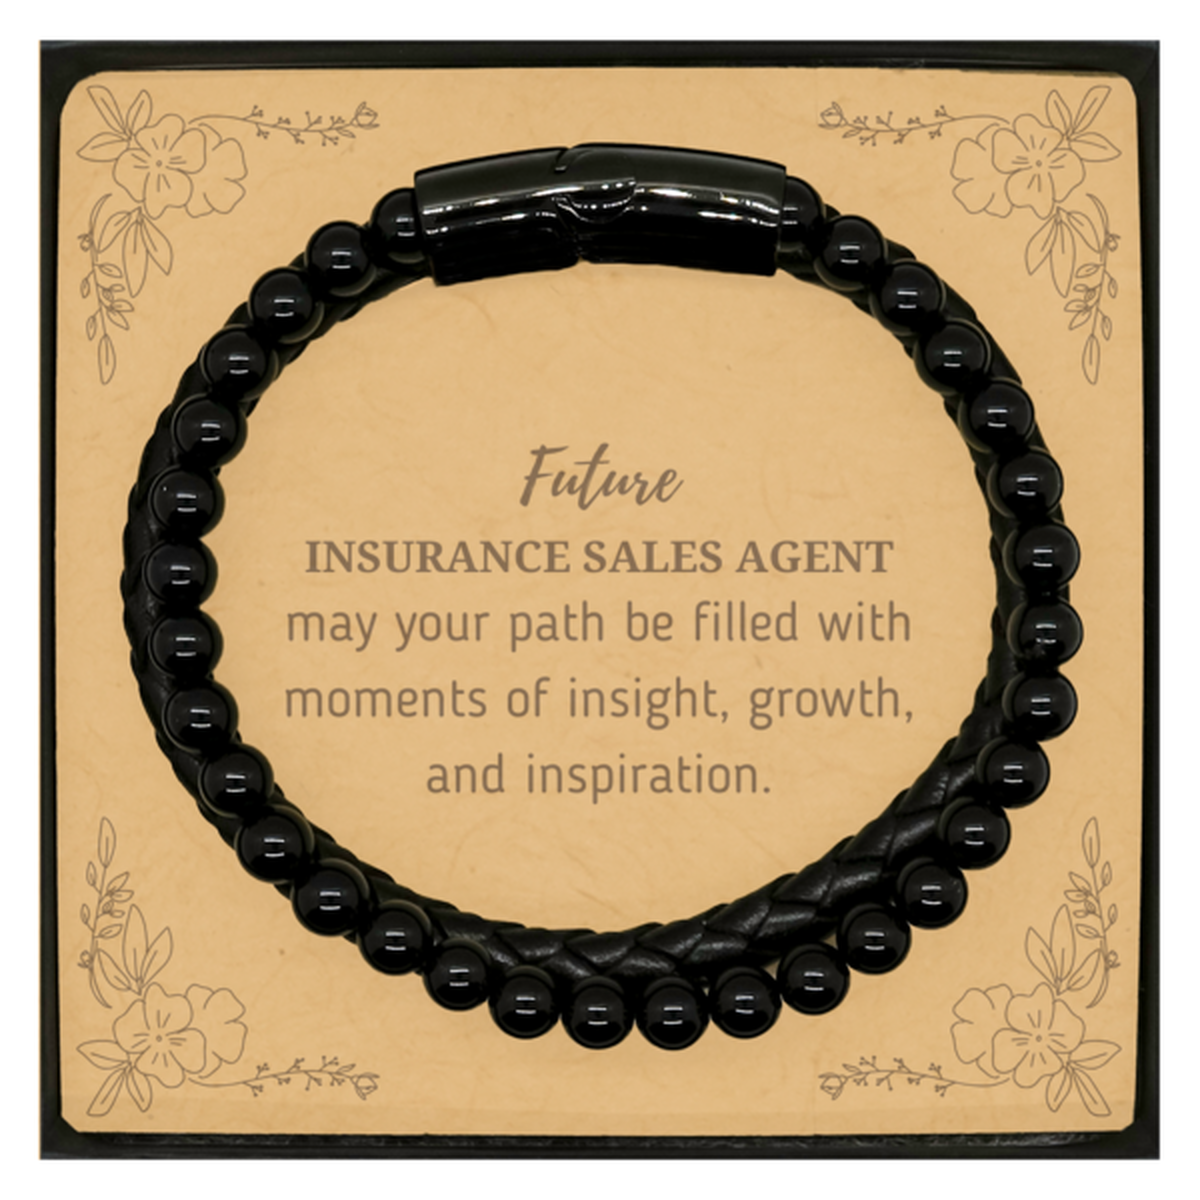 Future Insurance Sales Agent Gifts, May your path be filled with moments of insight, Graduation Gifts for New Insurance Sales Agent, Christmas Unique Stone Leather Bracelets For Men, Women, Friends